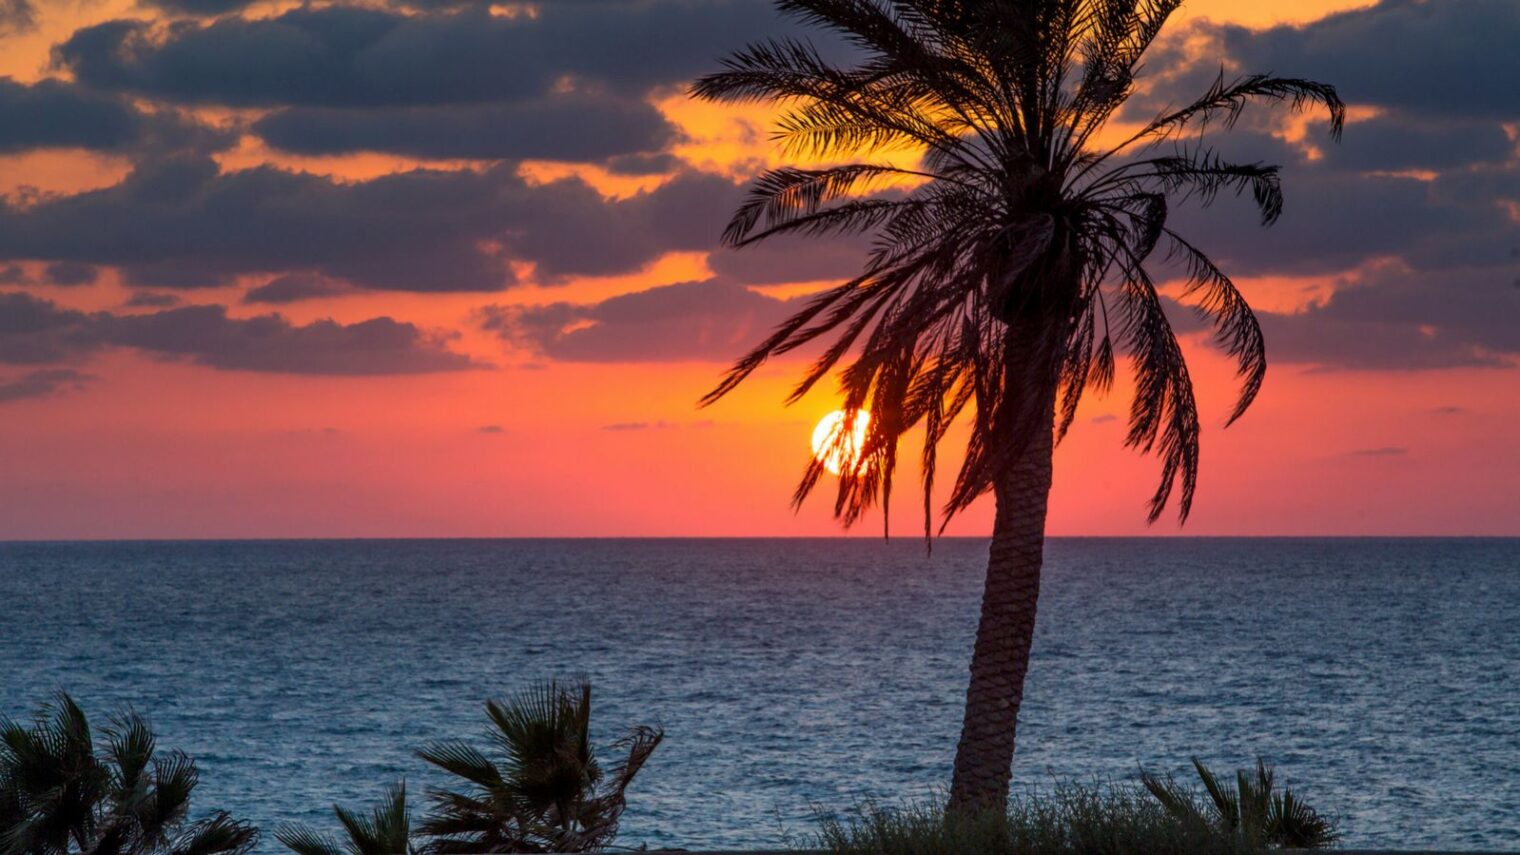 The sun sets over the Mediterranean Sea, as seen from the beach in Ashkelon. Photo by Edi Israel/FLASH90